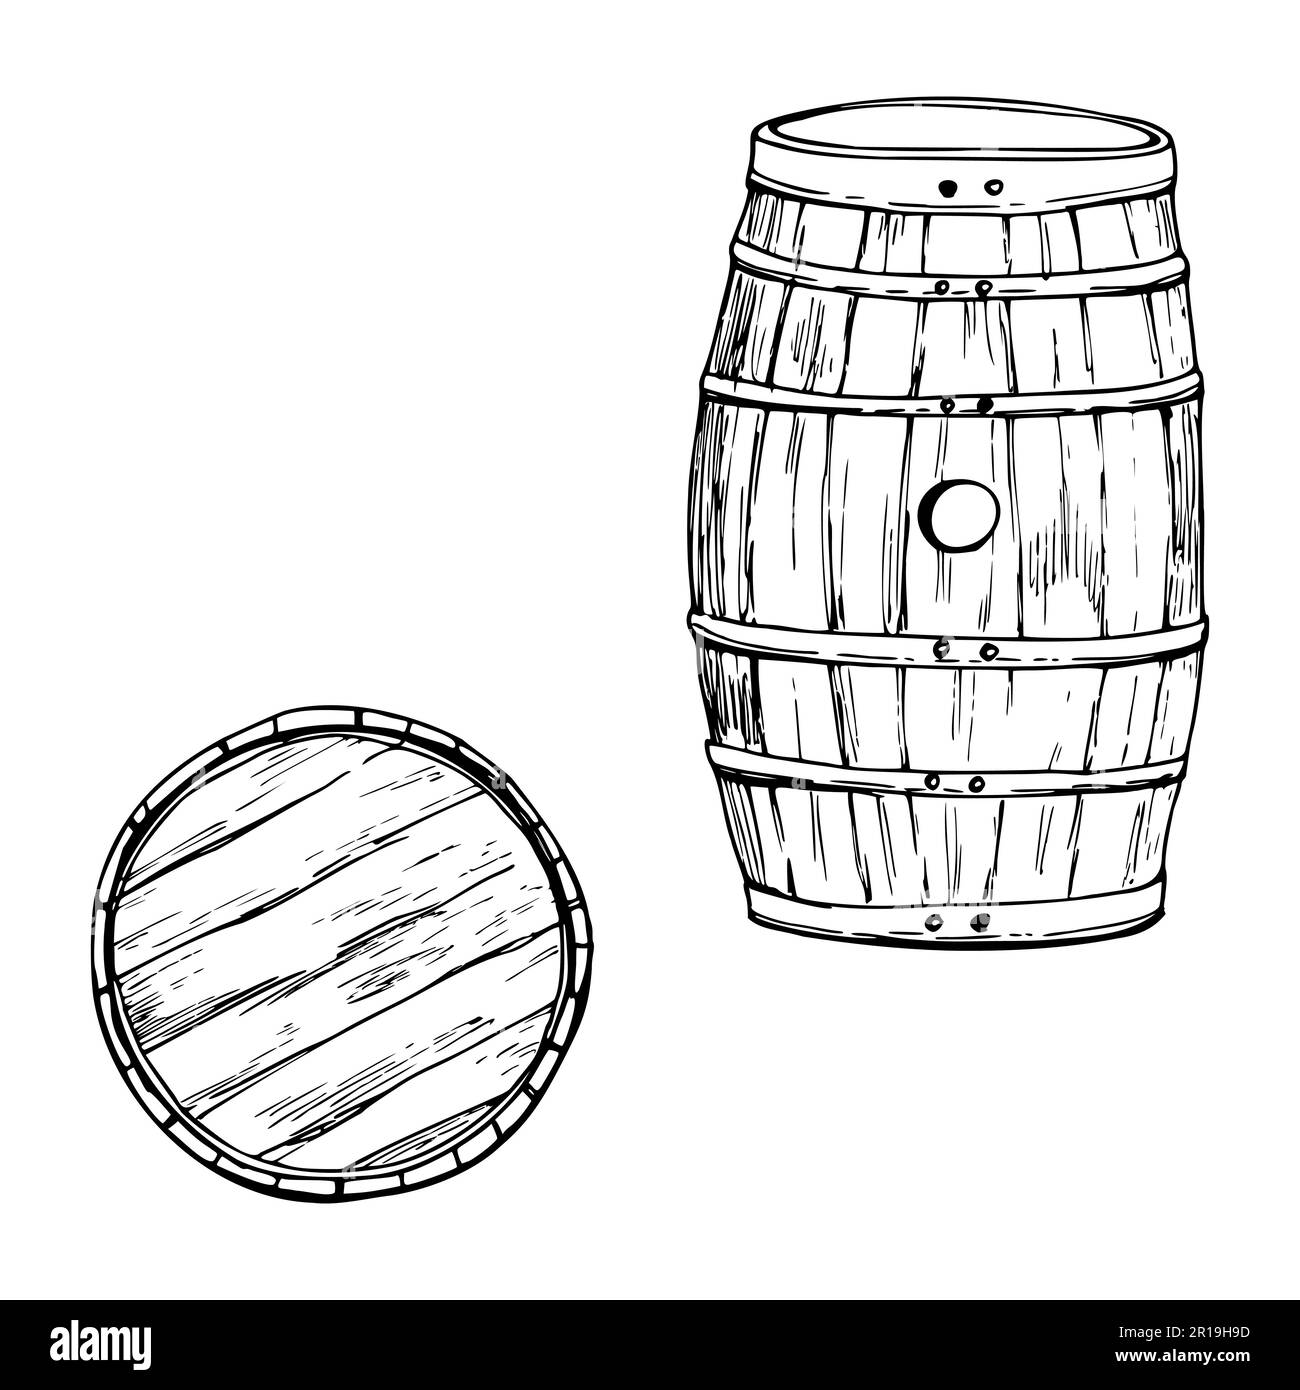 Ink hand drawn vector sketch of isolated object. Wooden barrel side and top view for storing liquor whisky whiskey sherry beer. Design for tourism Stock Vector